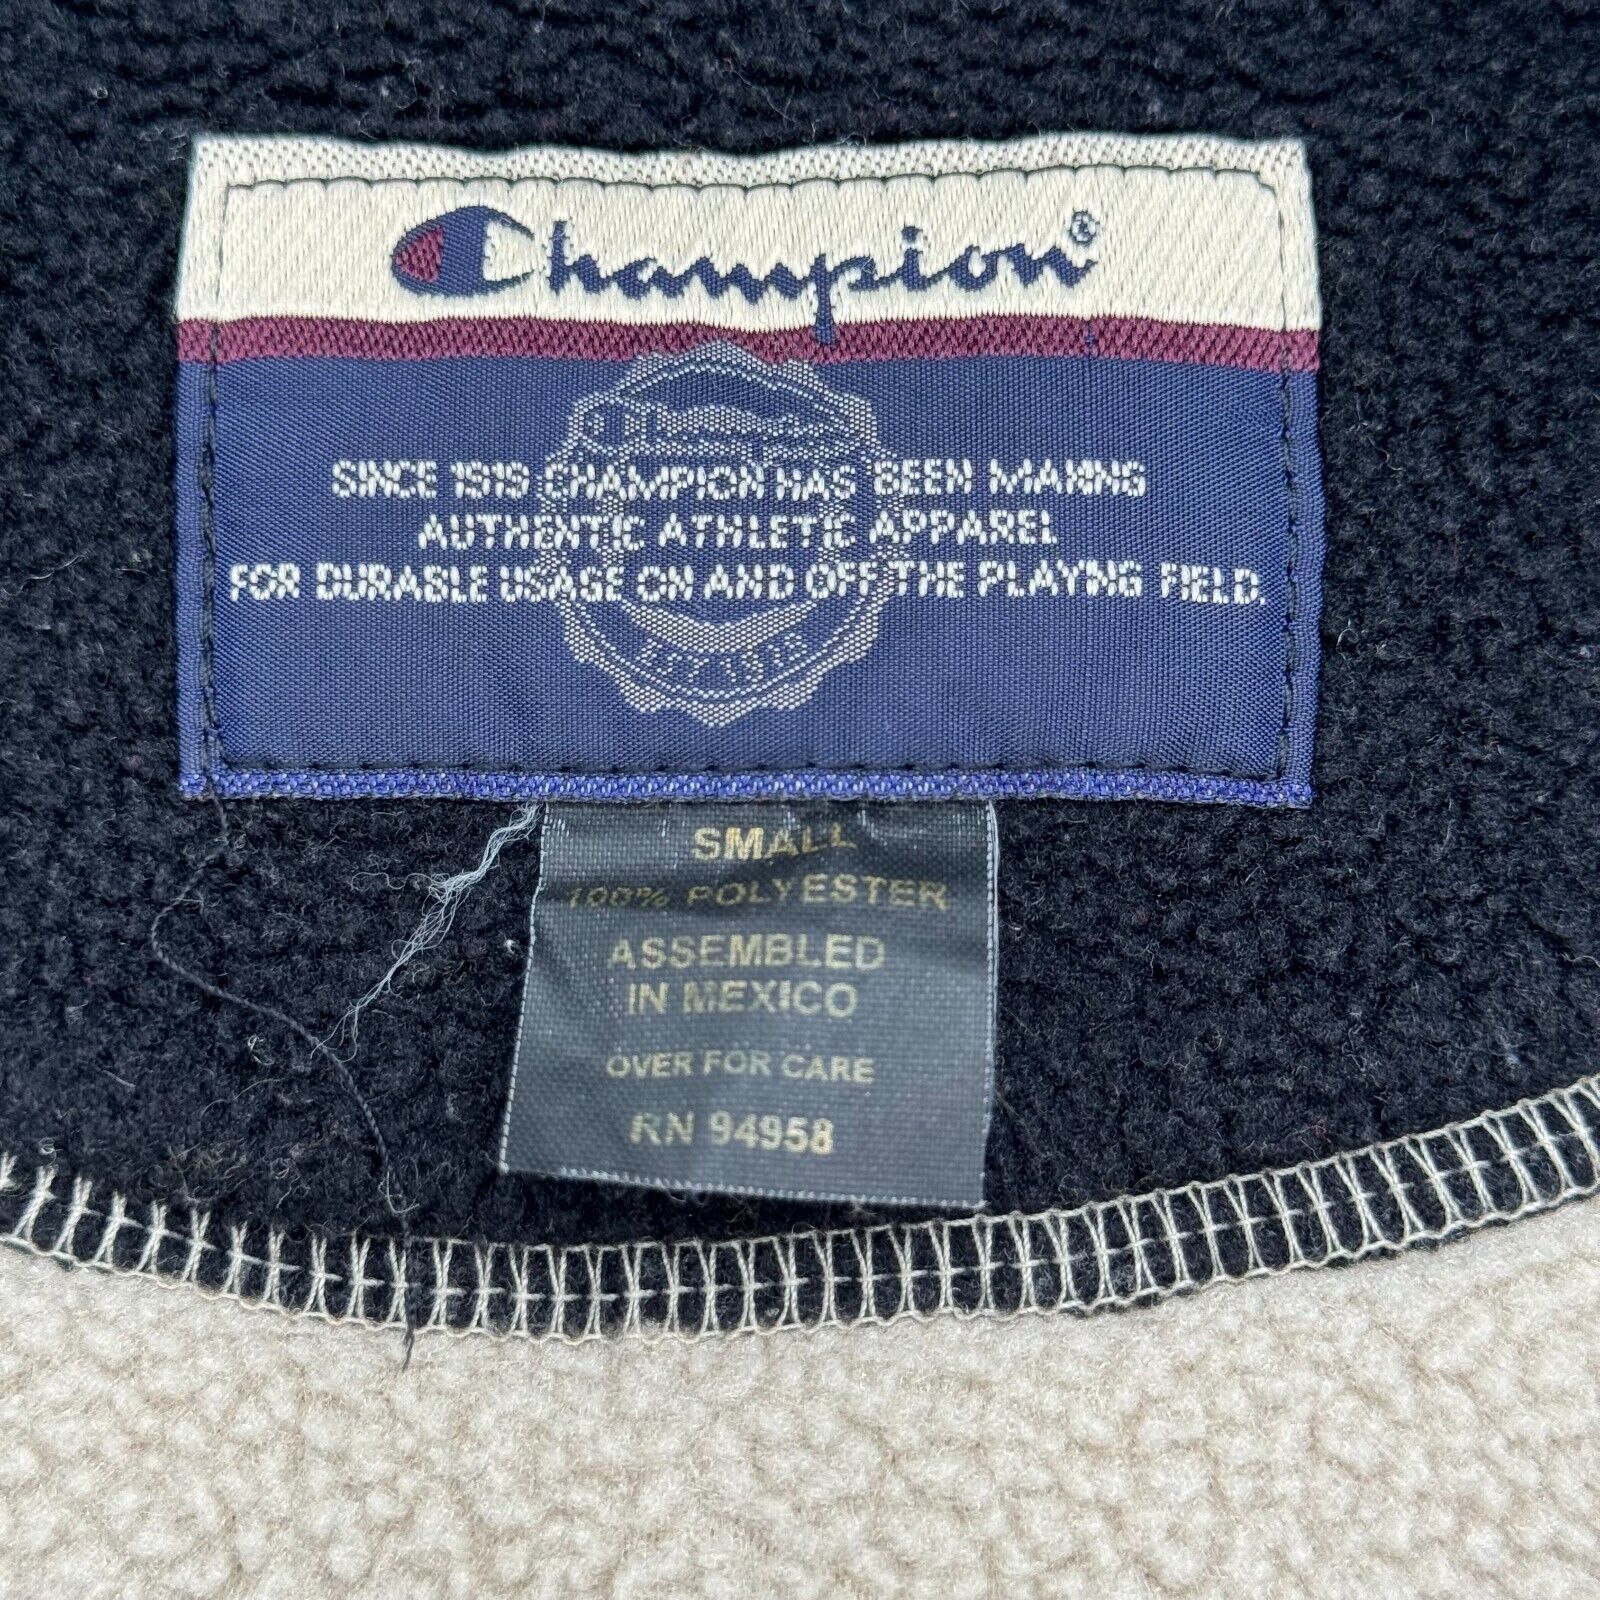 Champion Fleece Vest Vintage 90s Style Full Zip Up Front Pockets Mens Size Small